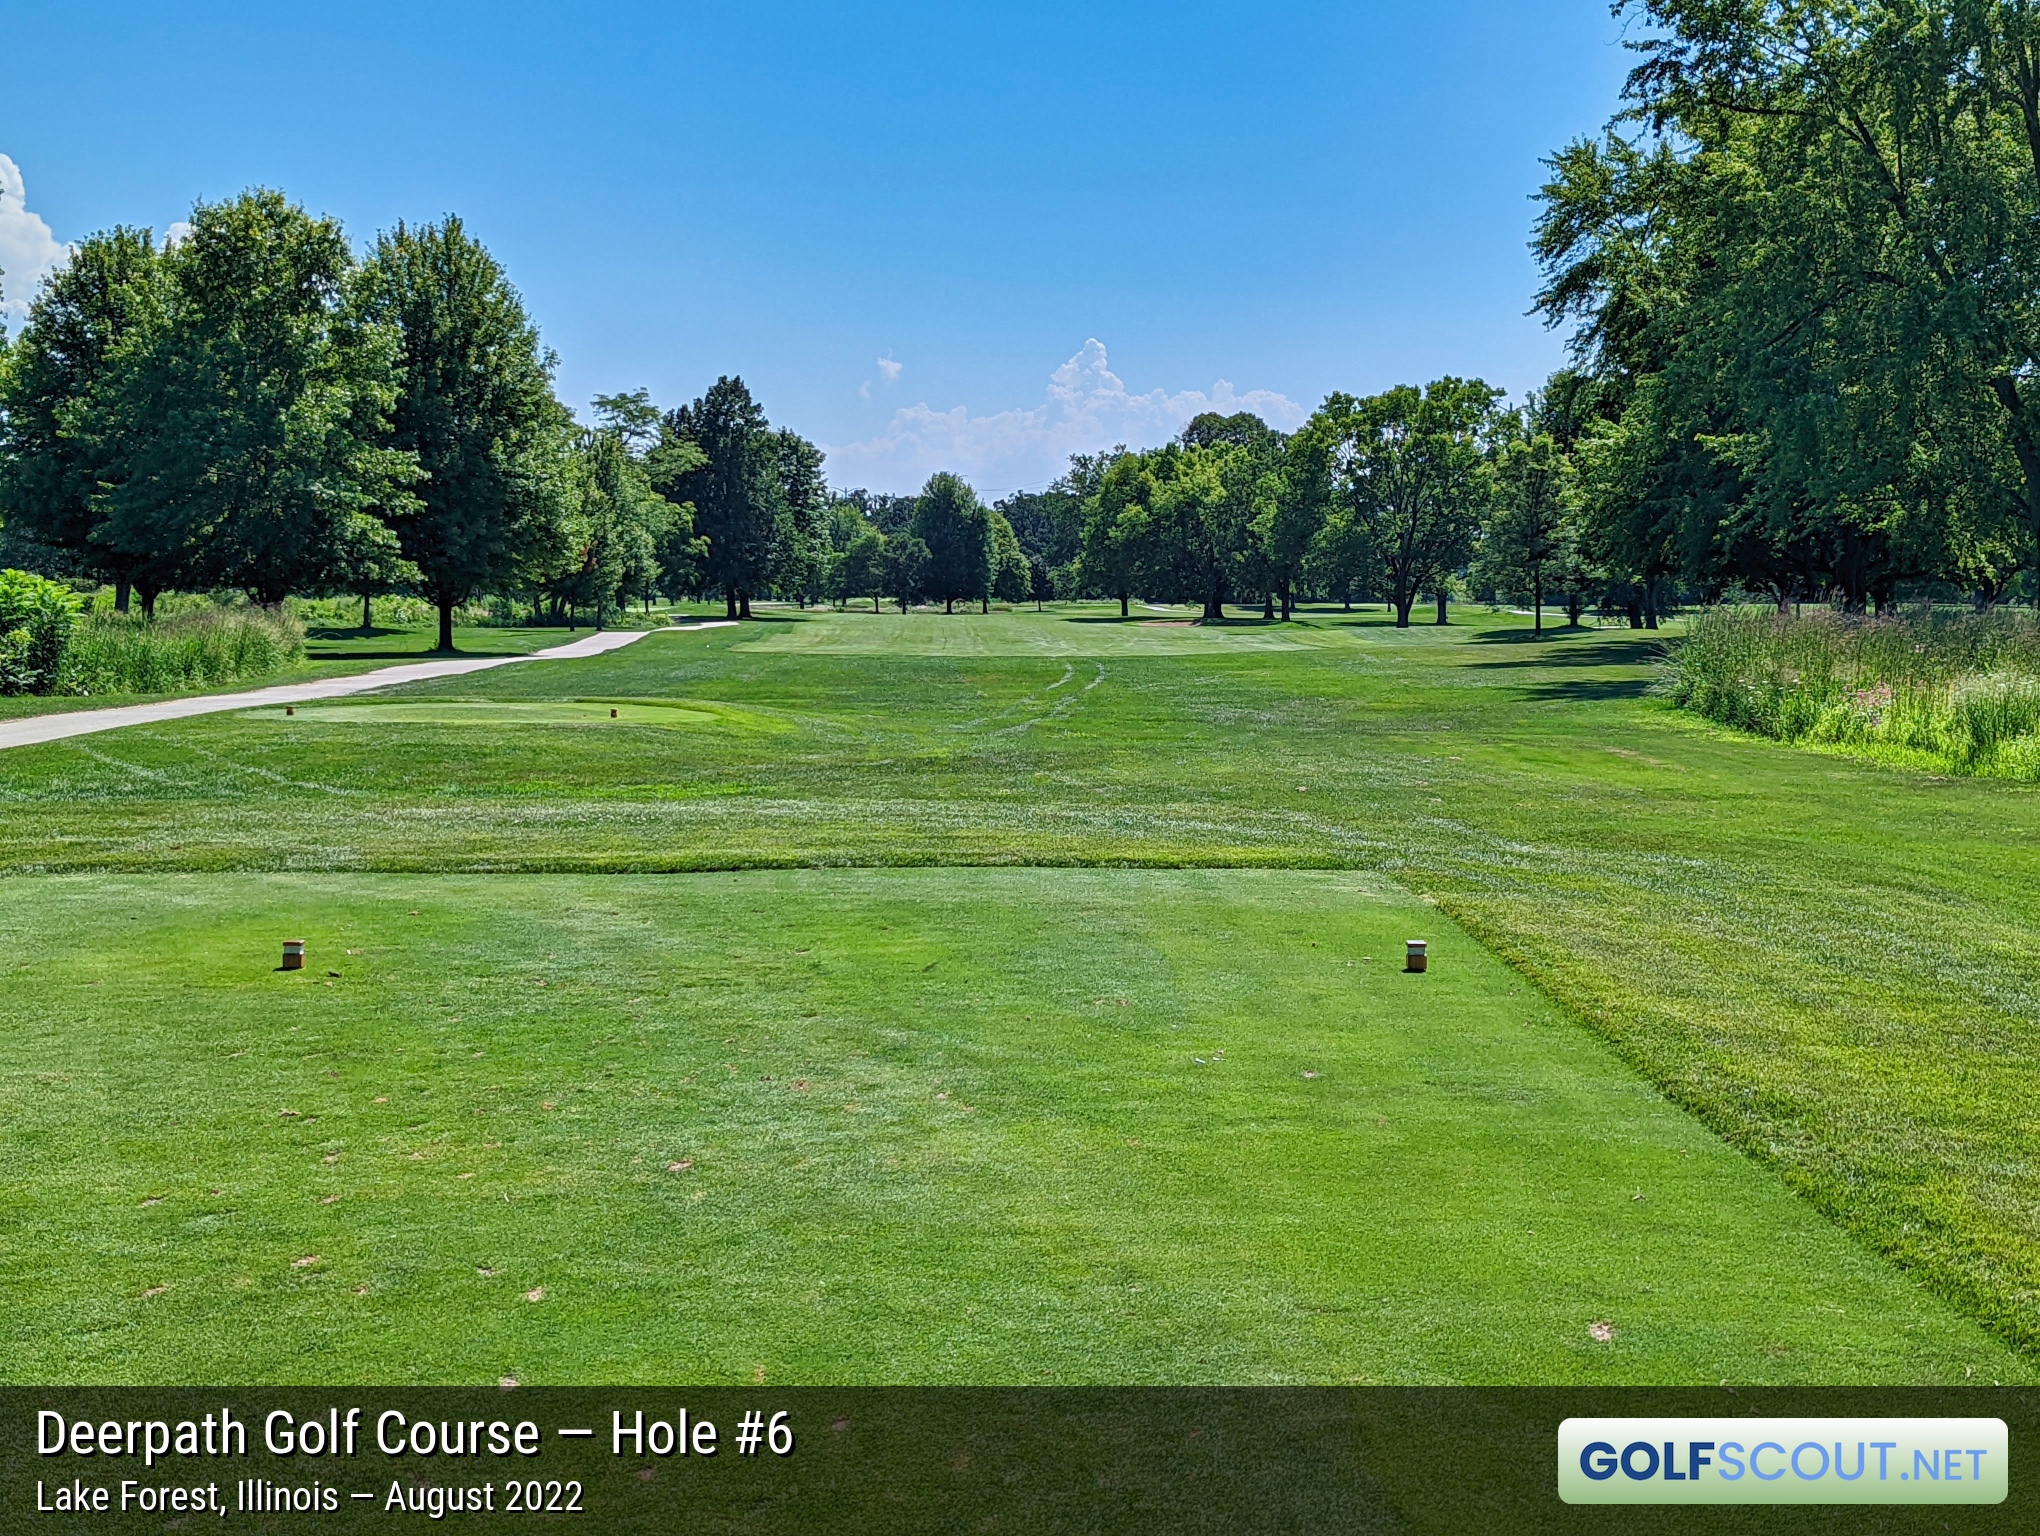 Photo of hole #6 at Deerpath Golf Course in Lake Forest, Illinois. 